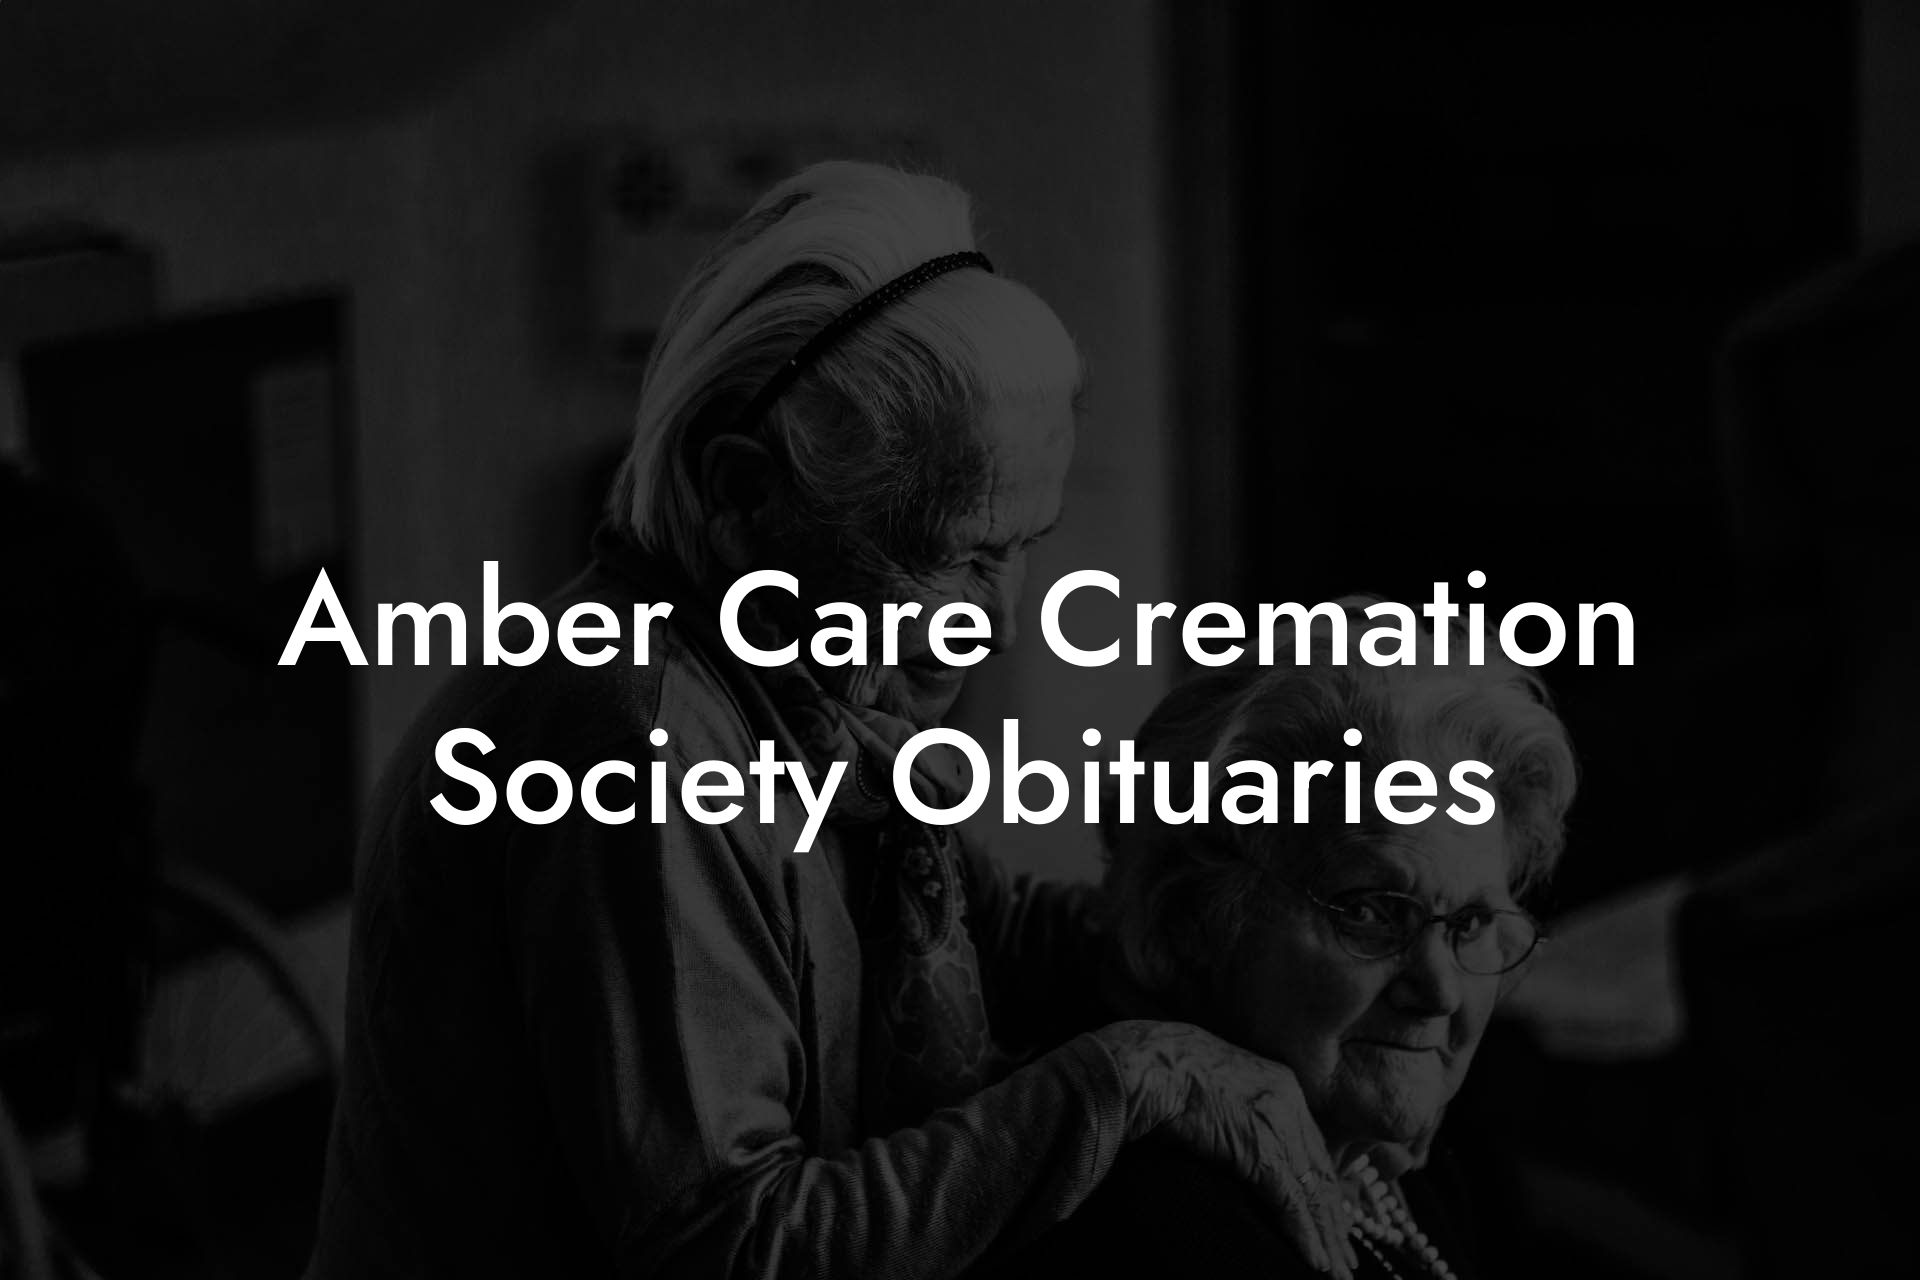 Amber Care Cremation Society Obituaries